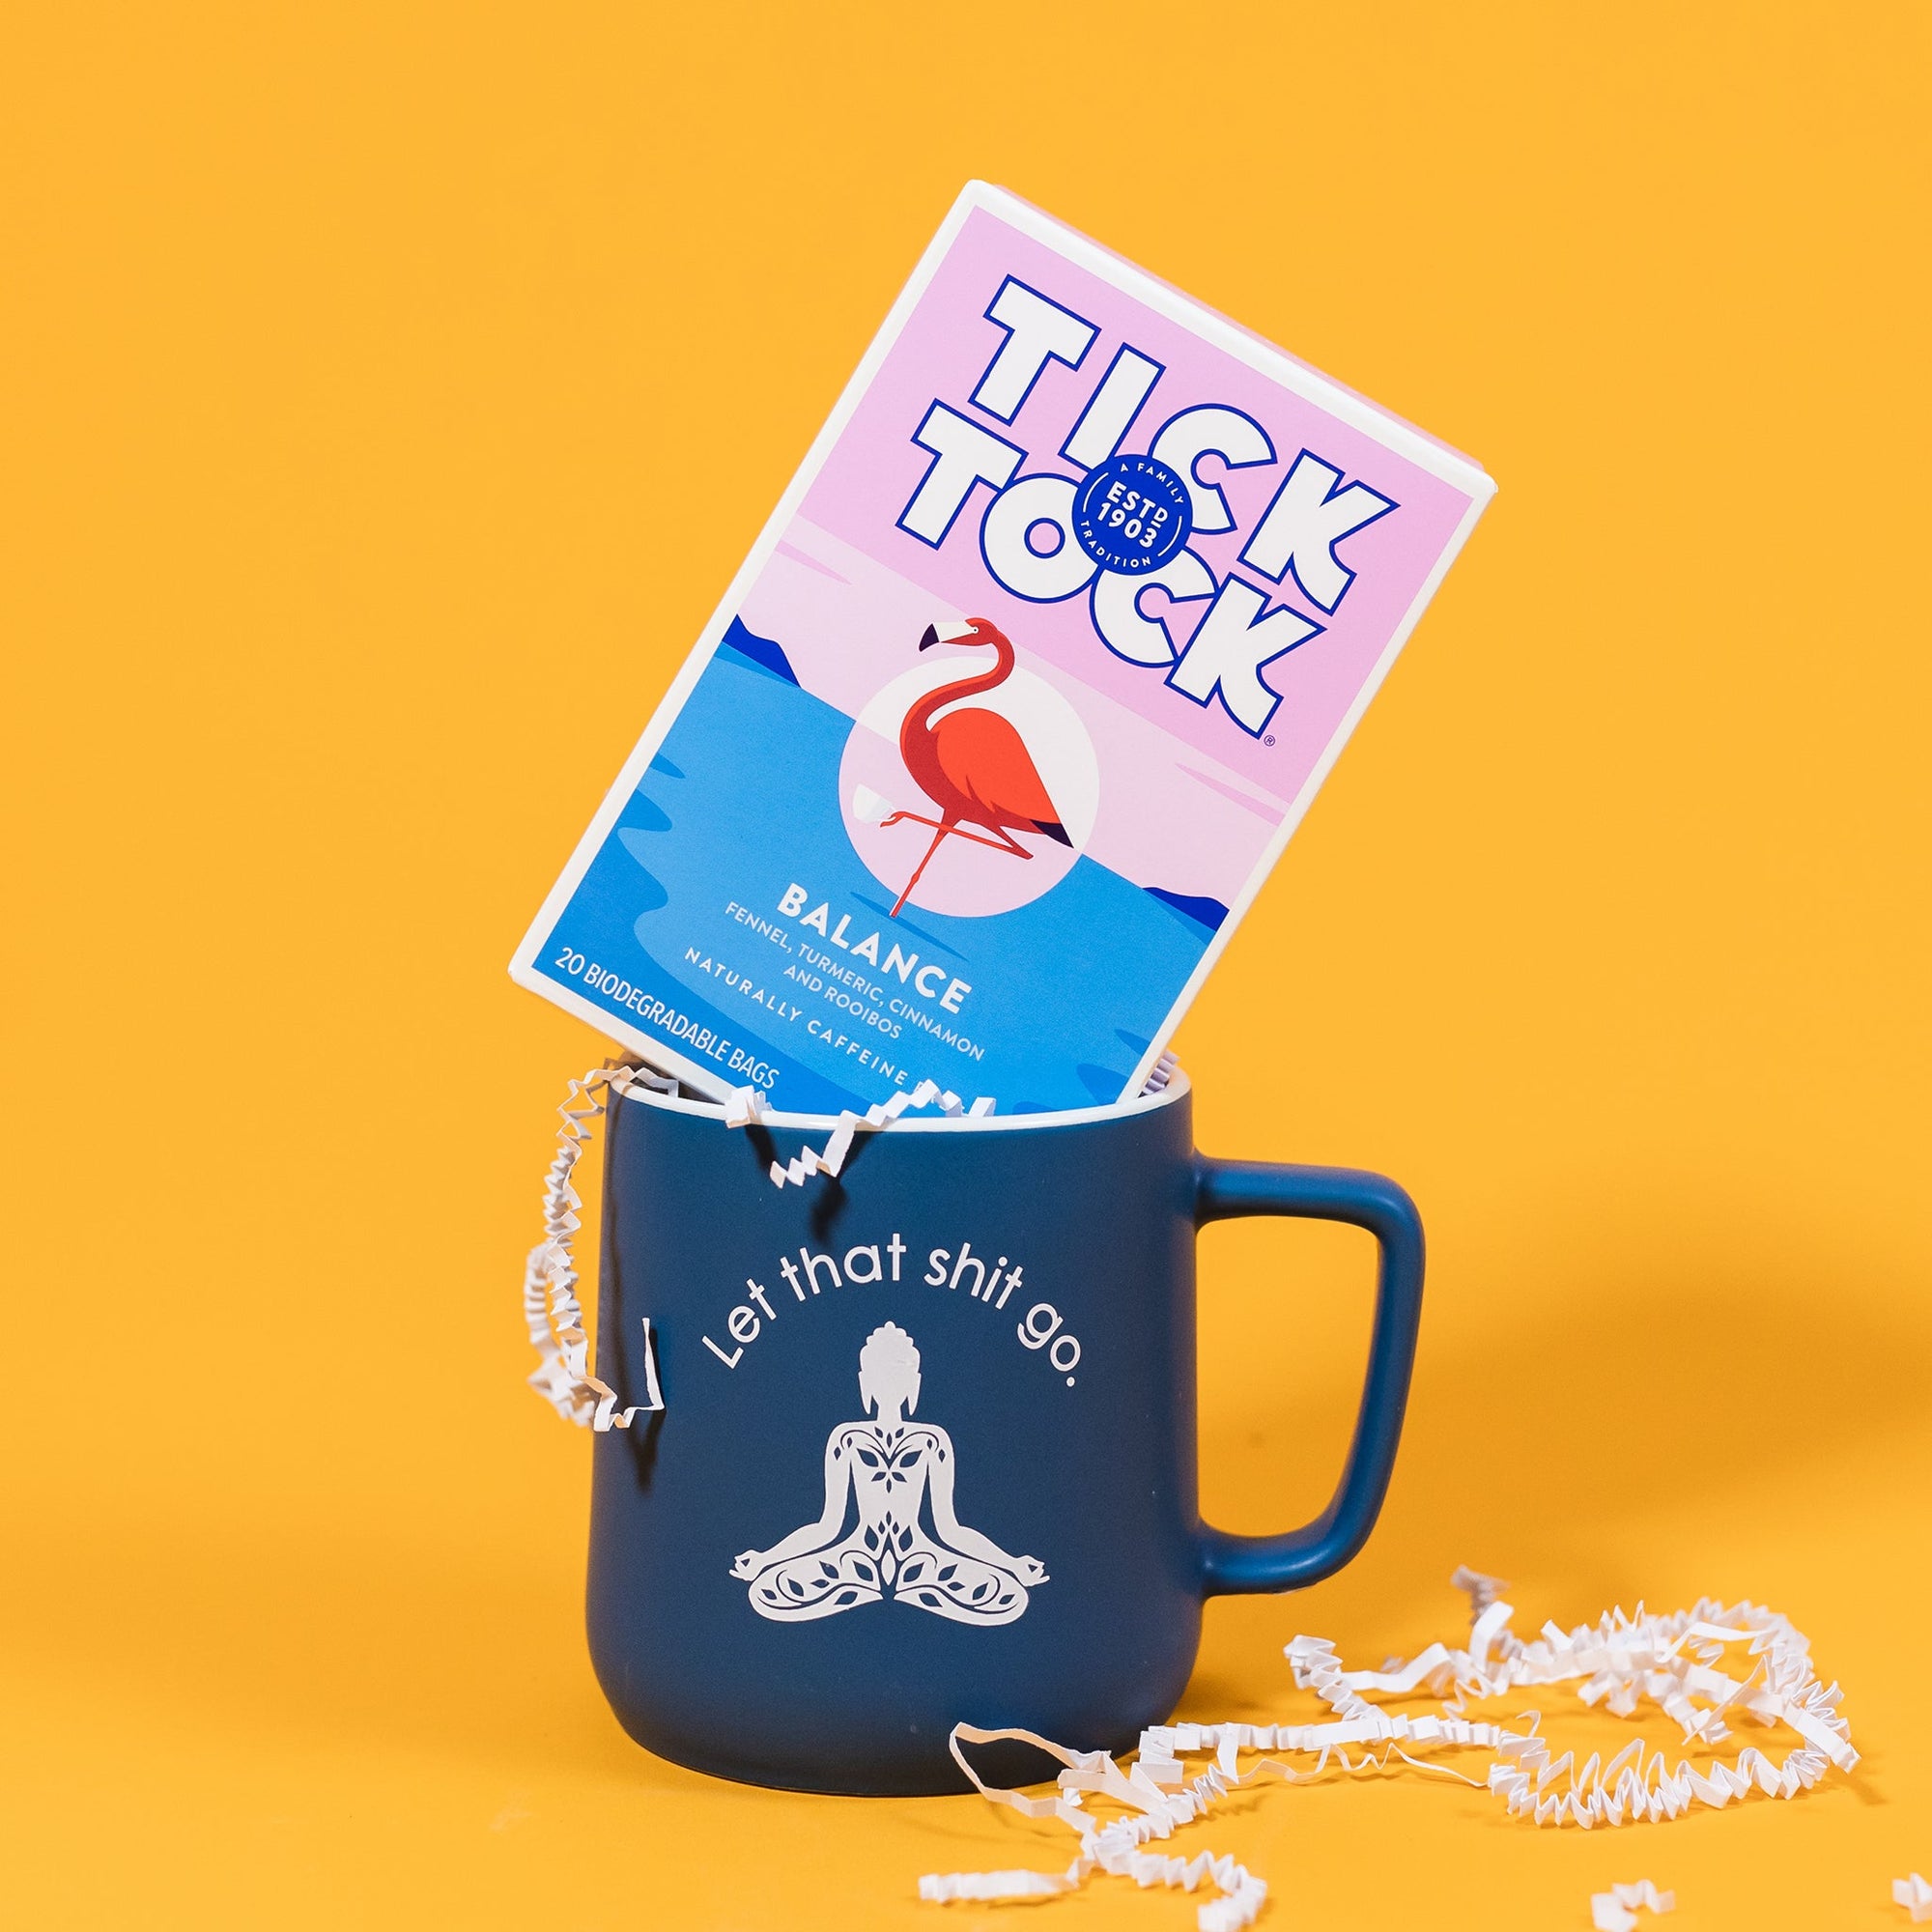 On a sunny mustard background sits a blue mug with white on the inside and on the brim. There is a buddha meditation pose in white, with white block lettering that says "Let that shit go." It is filled with white crinkle. The box of tea sits atop the mug. The tea is Tick Tock Balance with blends of fennel, turmeric, cinnamon and rooibos and it is naturally caffeine free. There is an illustration of a flamingo standing on one leg. There is white crinkle scattered around. 